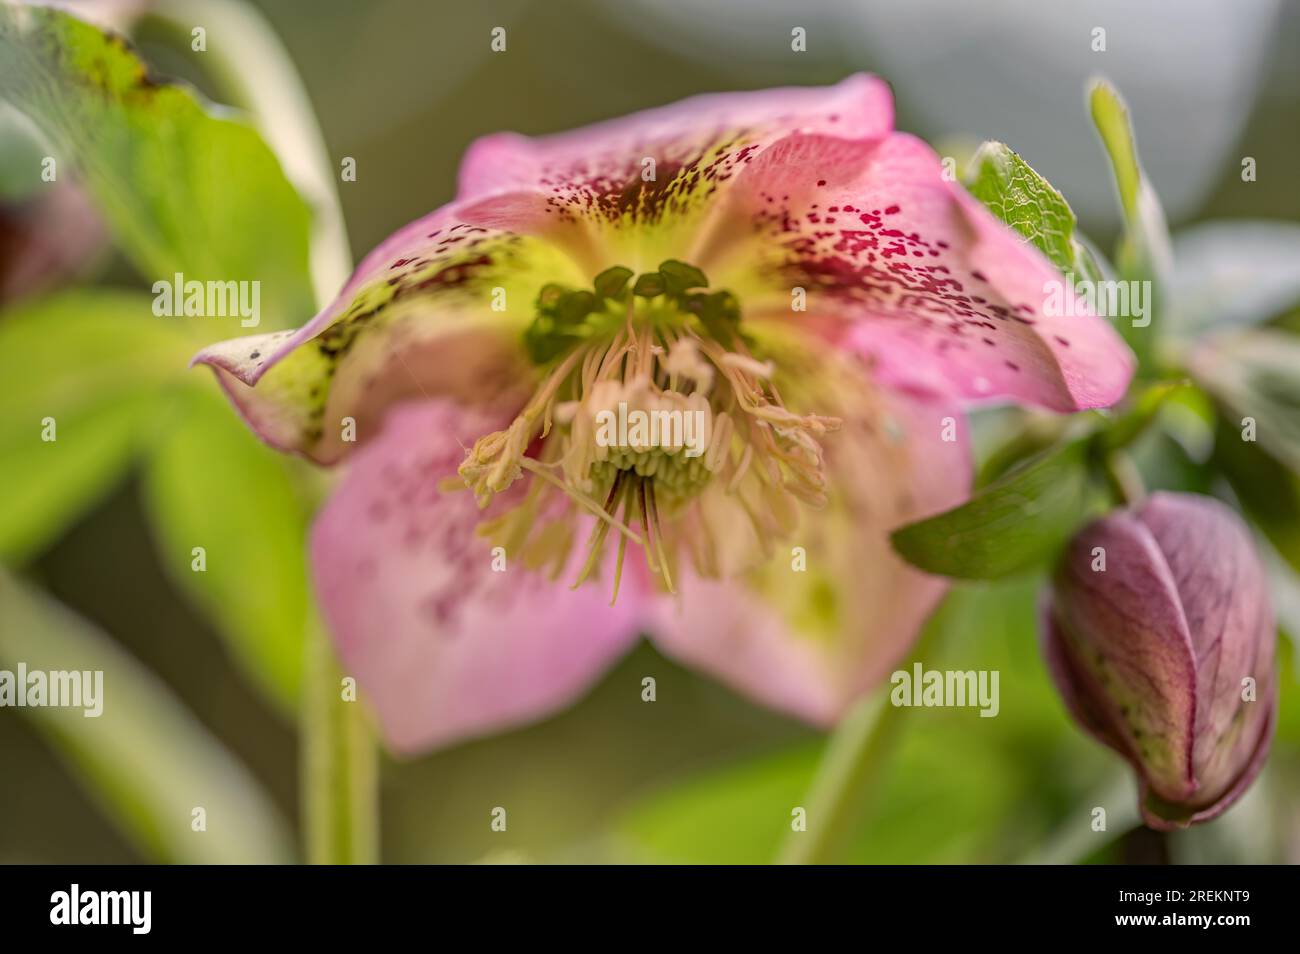 Green hellebore at flowering time Stock Photo